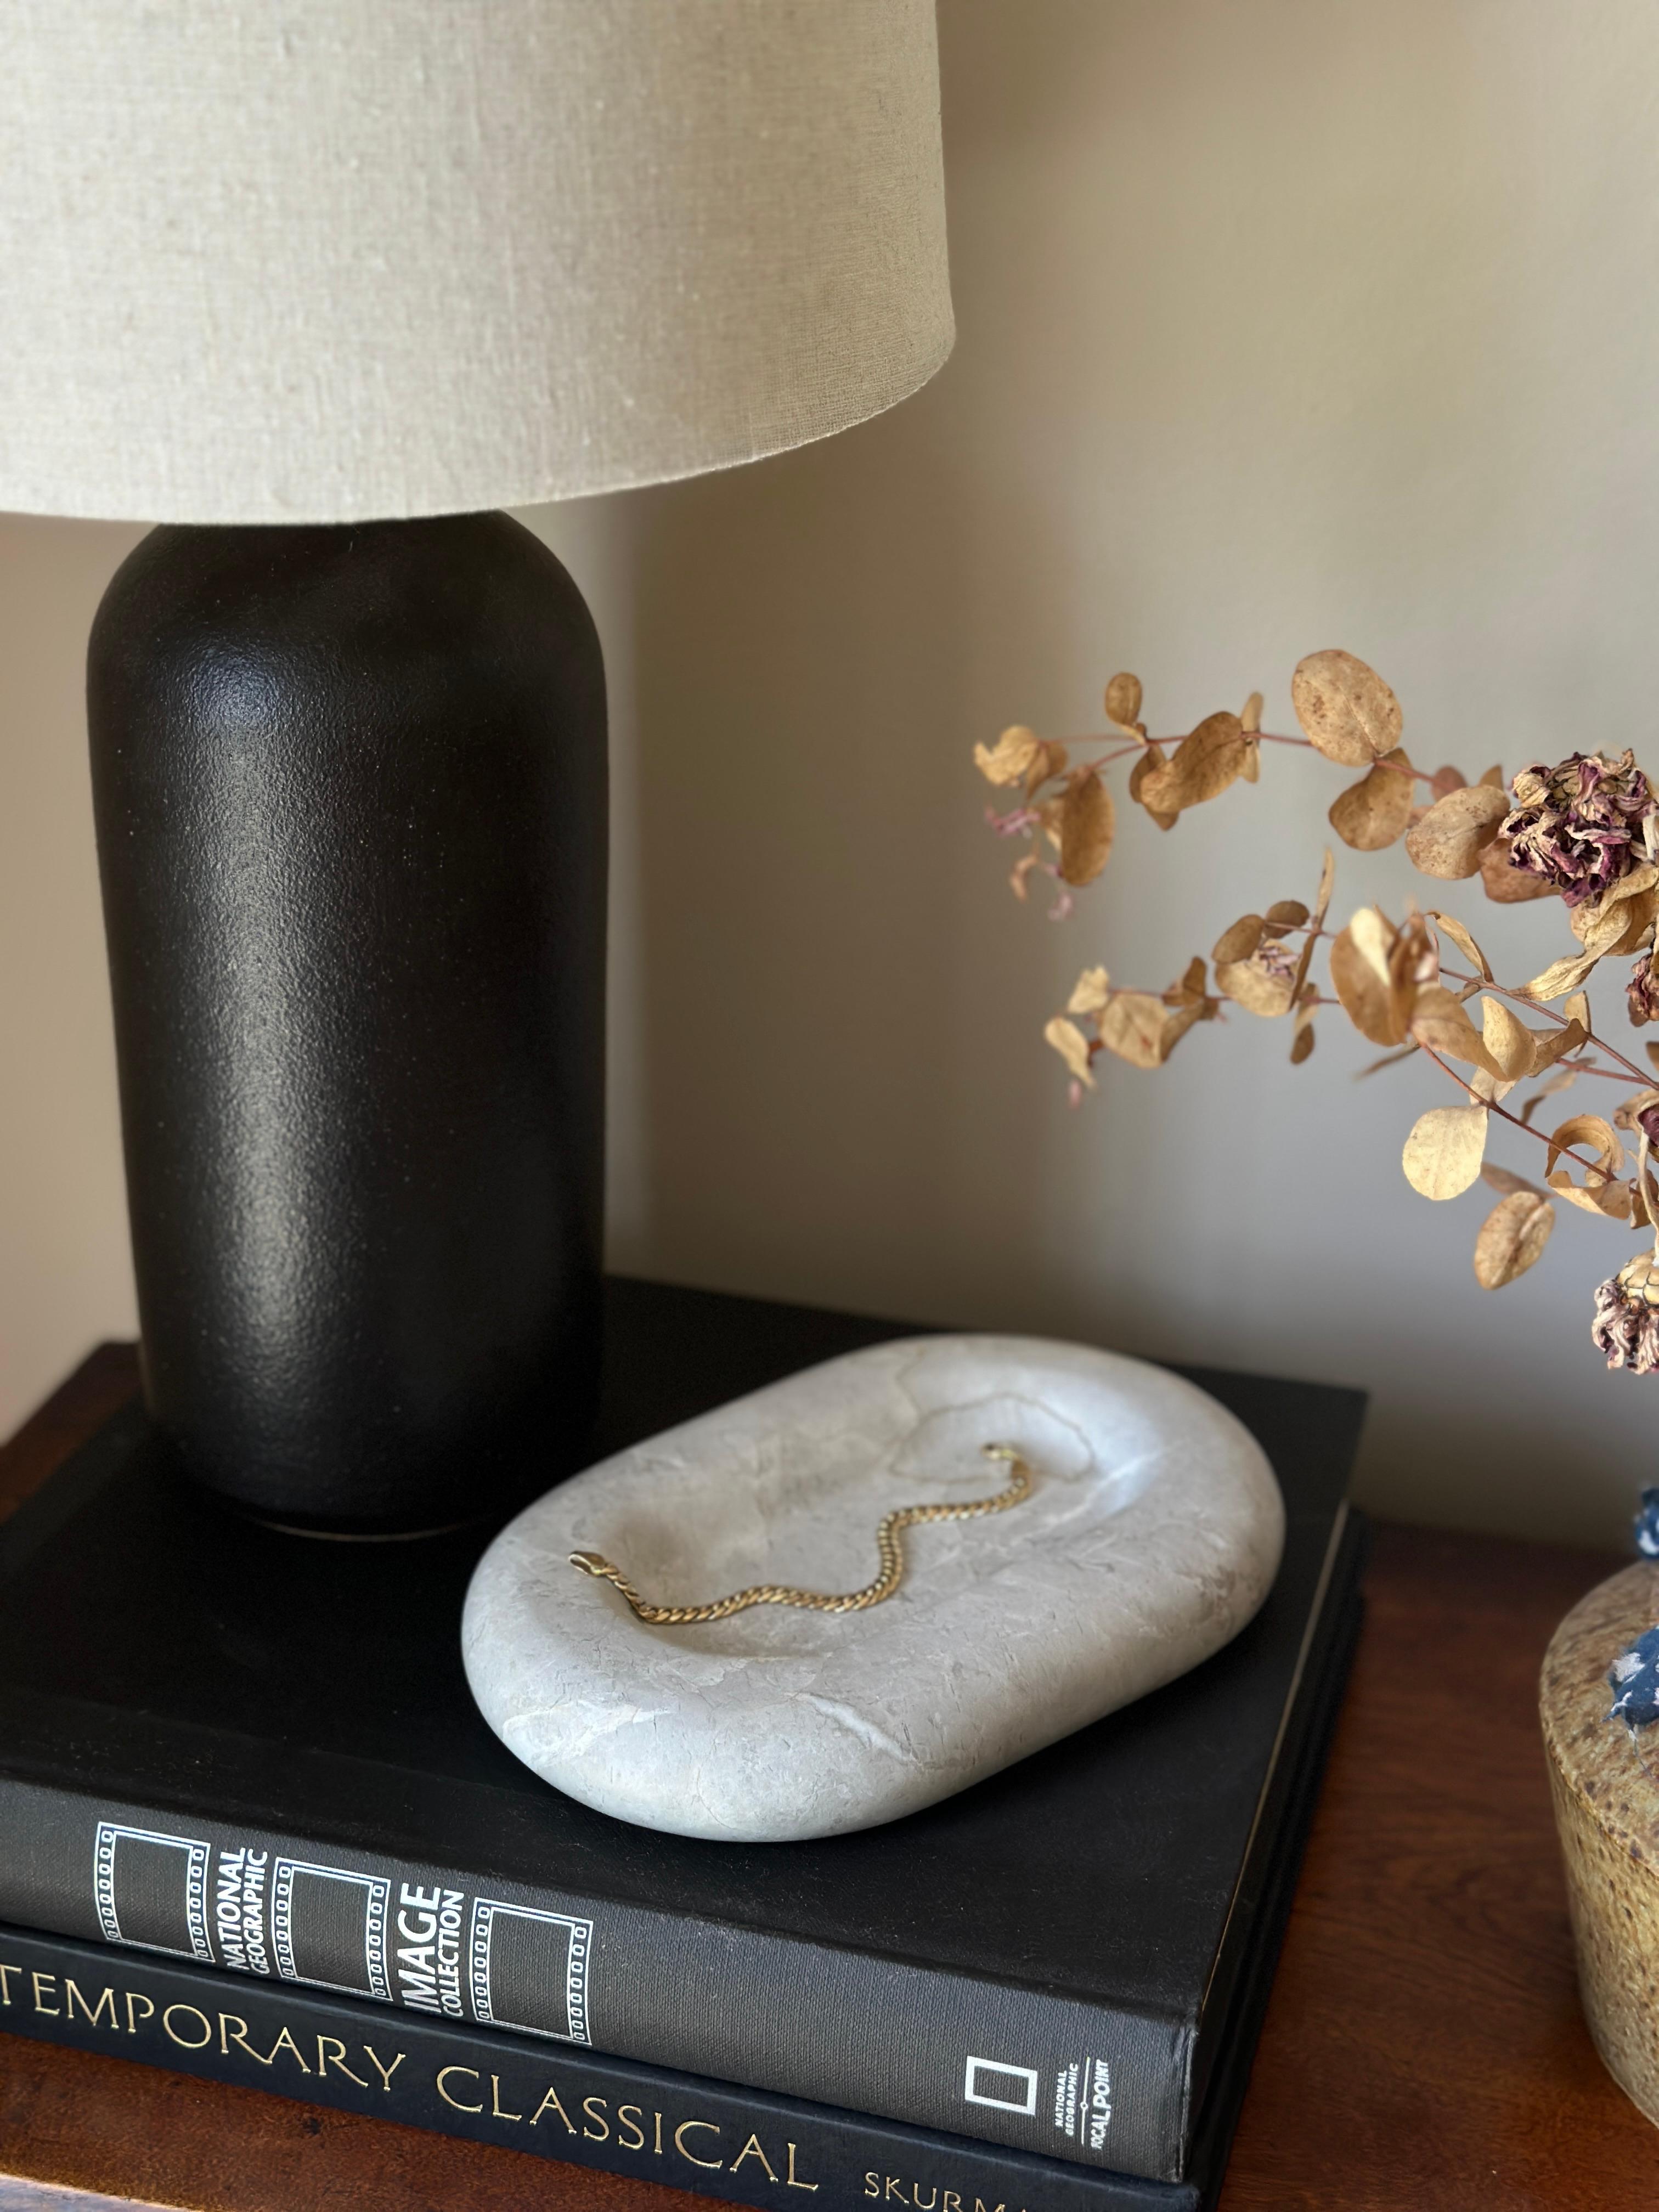 A limited production, functional object d'art exclusively produced by Anastasio Home. The Maddi is a chunky, six-inch oval catchall cut from a single piece of solid marble or stone with a large, playfully modern “puffed” border, hand-finished by